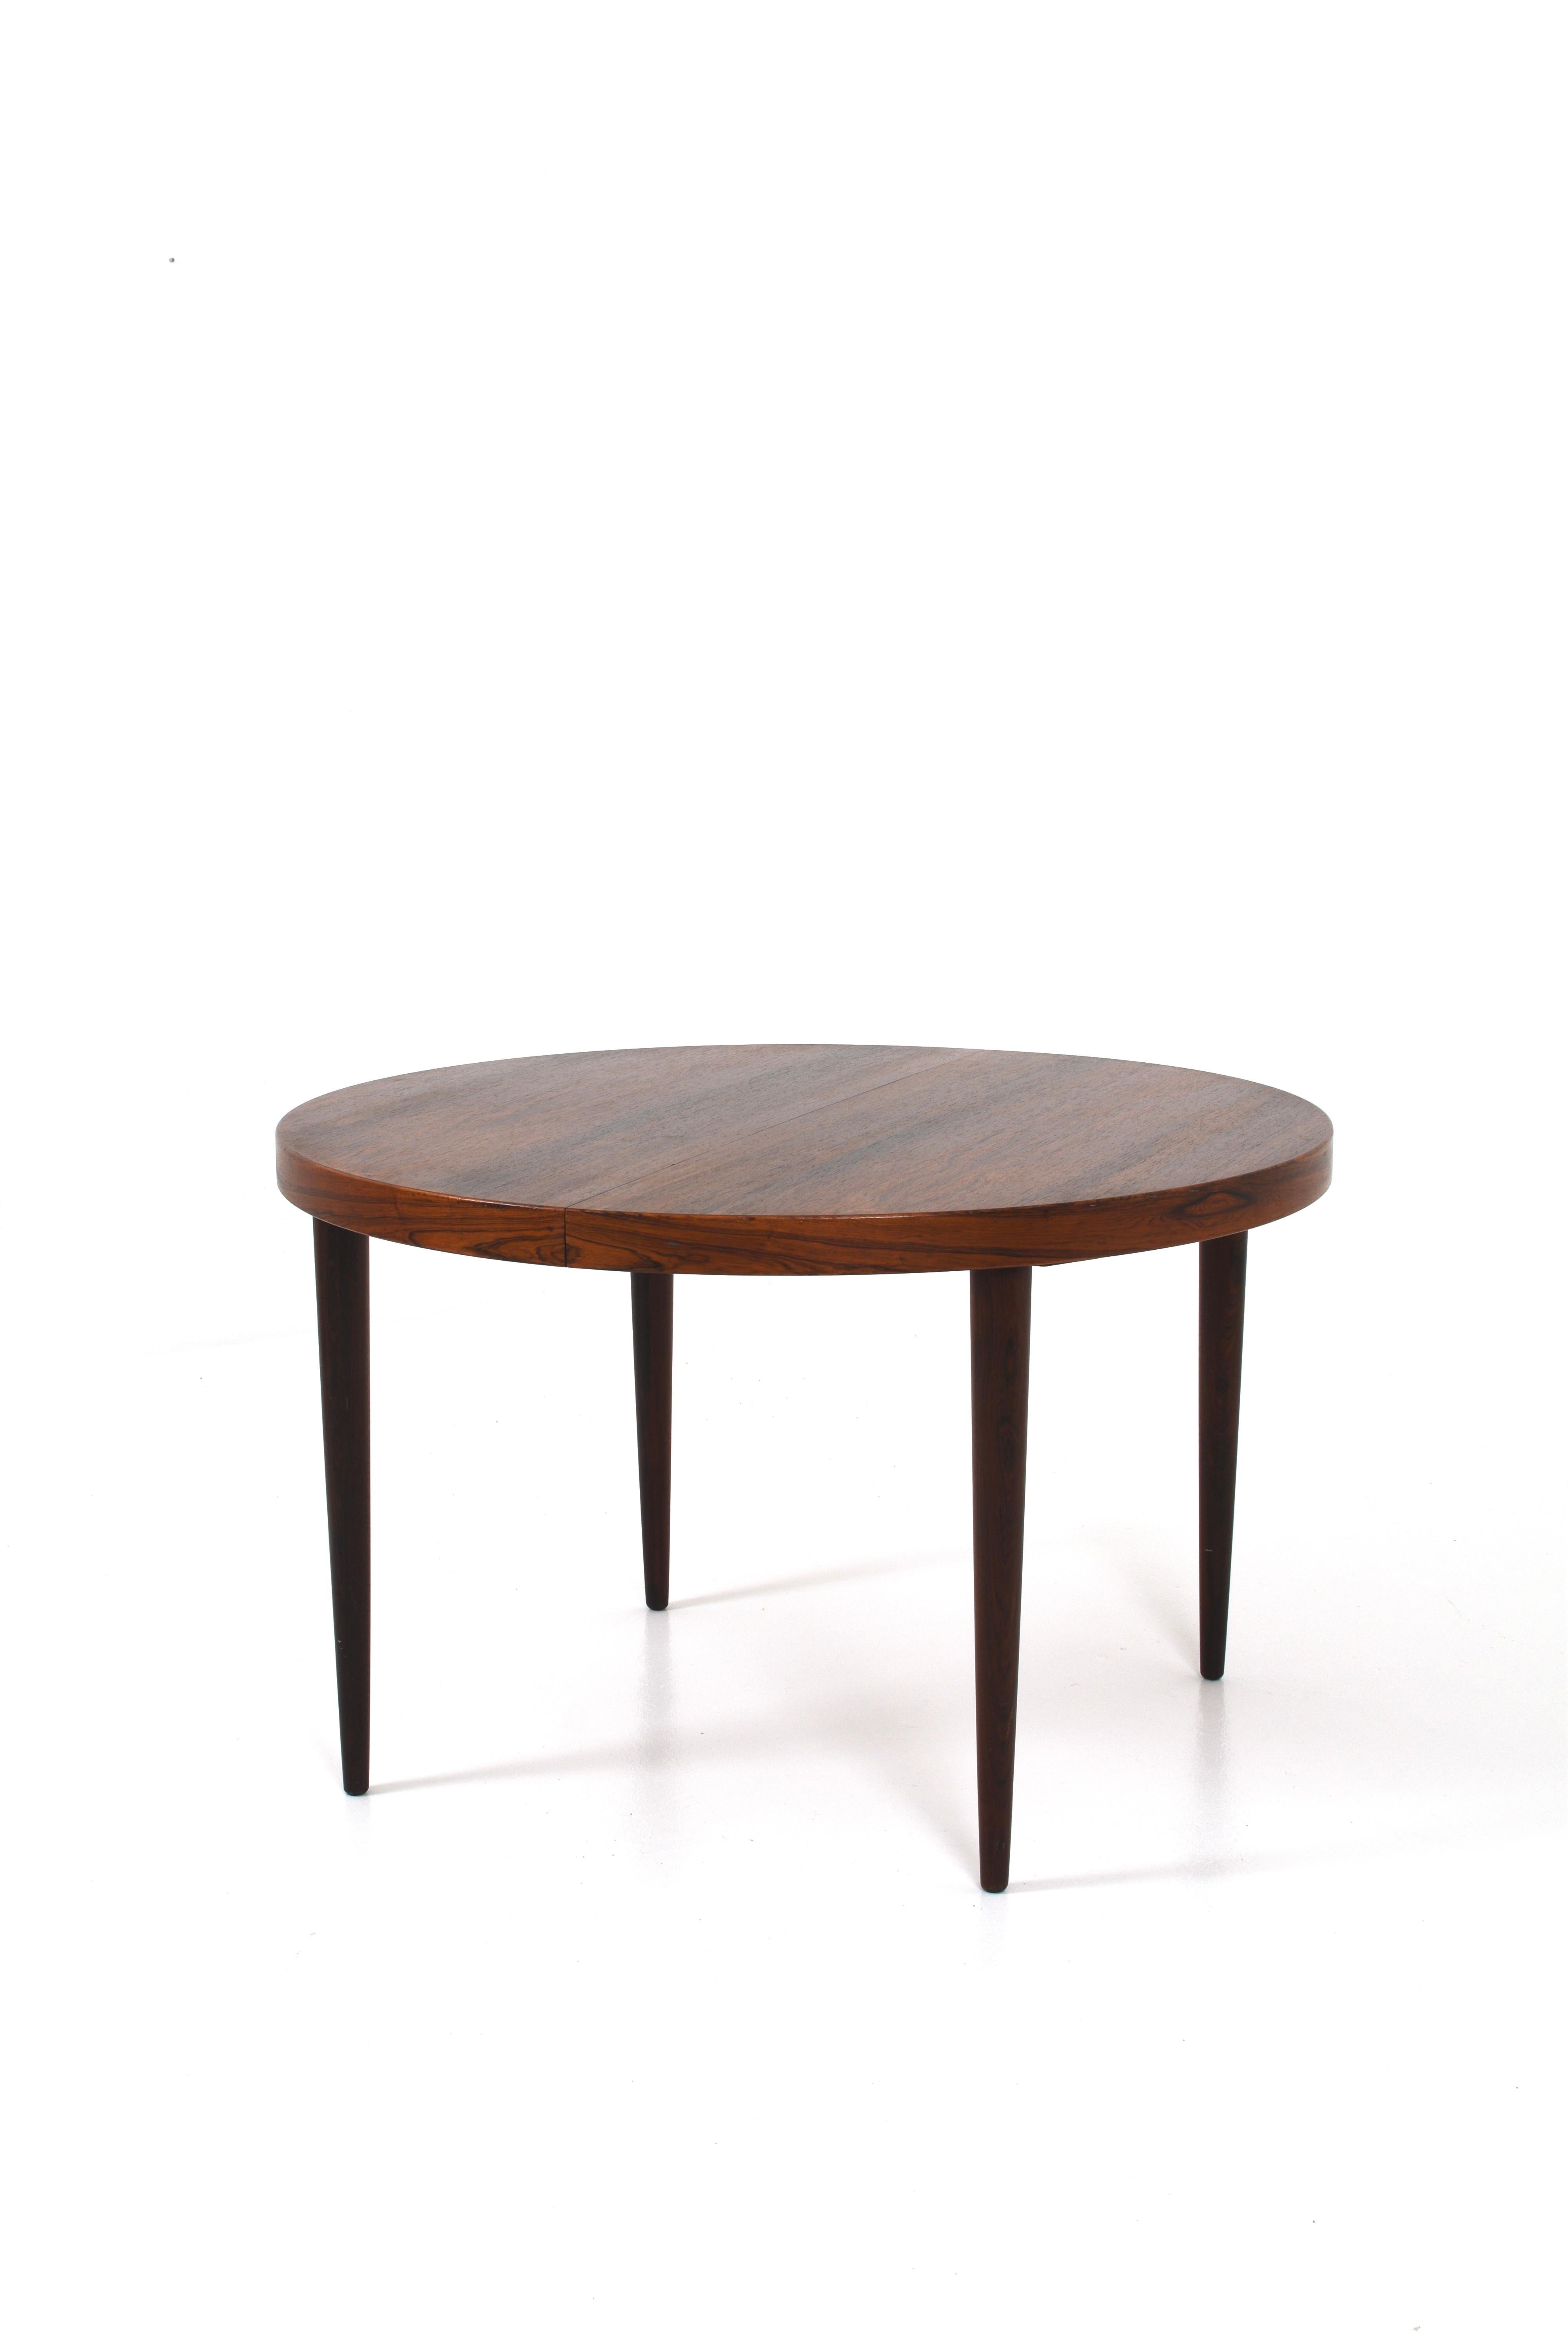 Rosewood Extendable Round Dining Table by Kai Kristiansen, Denmark, 1960s For Sale